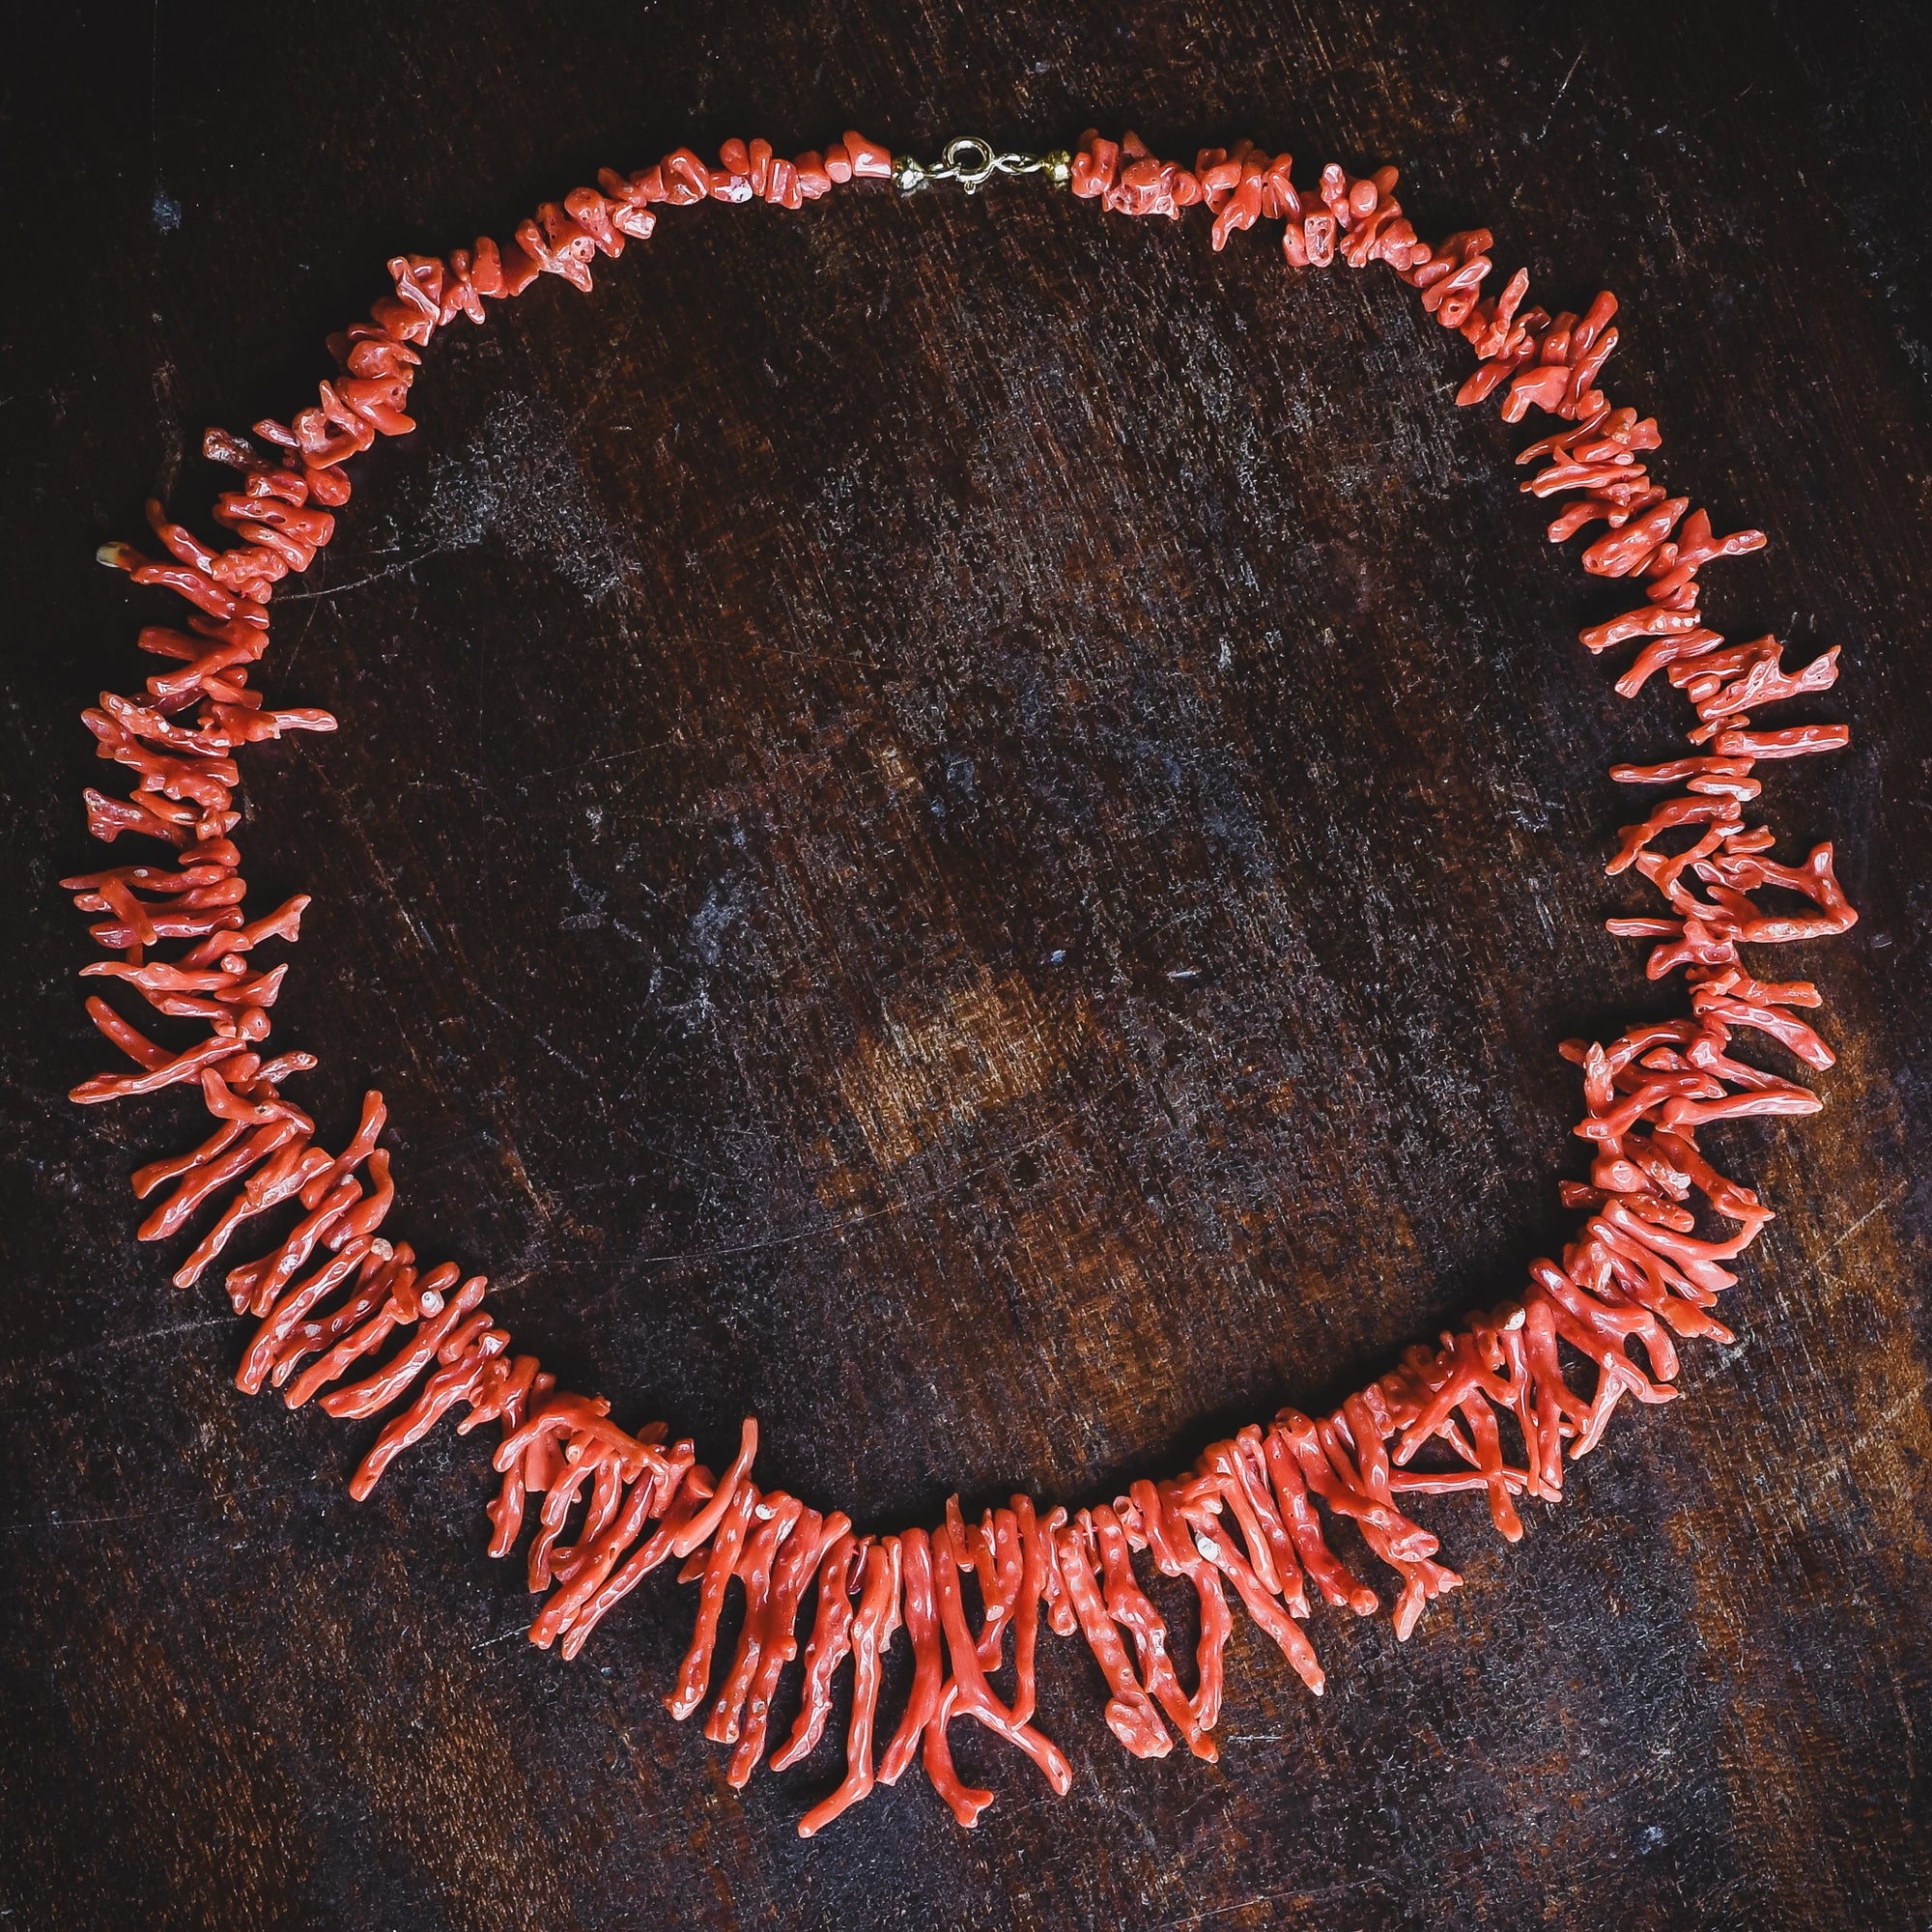 Victorian Red Coral Necklace – Butter Lane Antiques